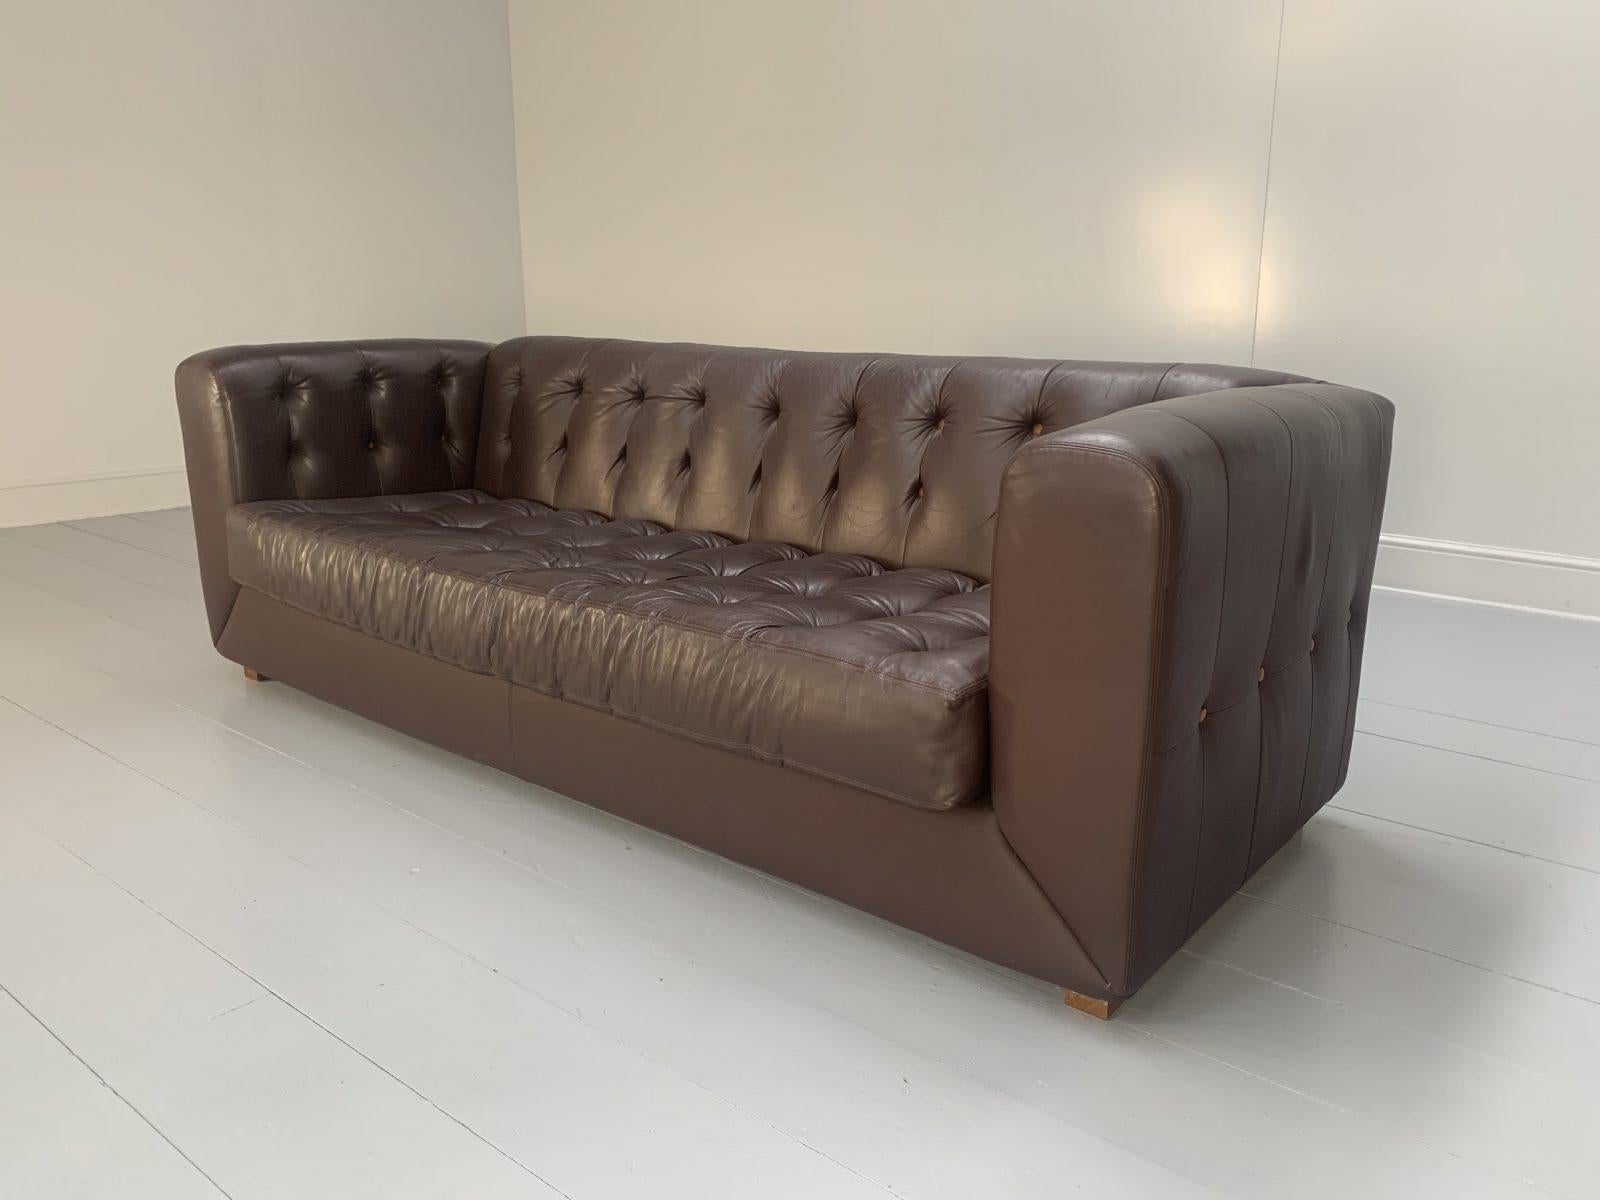 This is a superb David Linley “Yoxford” 3-seat Modern-Chesterfield Sofa, dressed in a luxurious, top-grade Brown Leather and with Walnut detail.

In a world of temporary pleasures, Linley create beautiful furniture built to last a